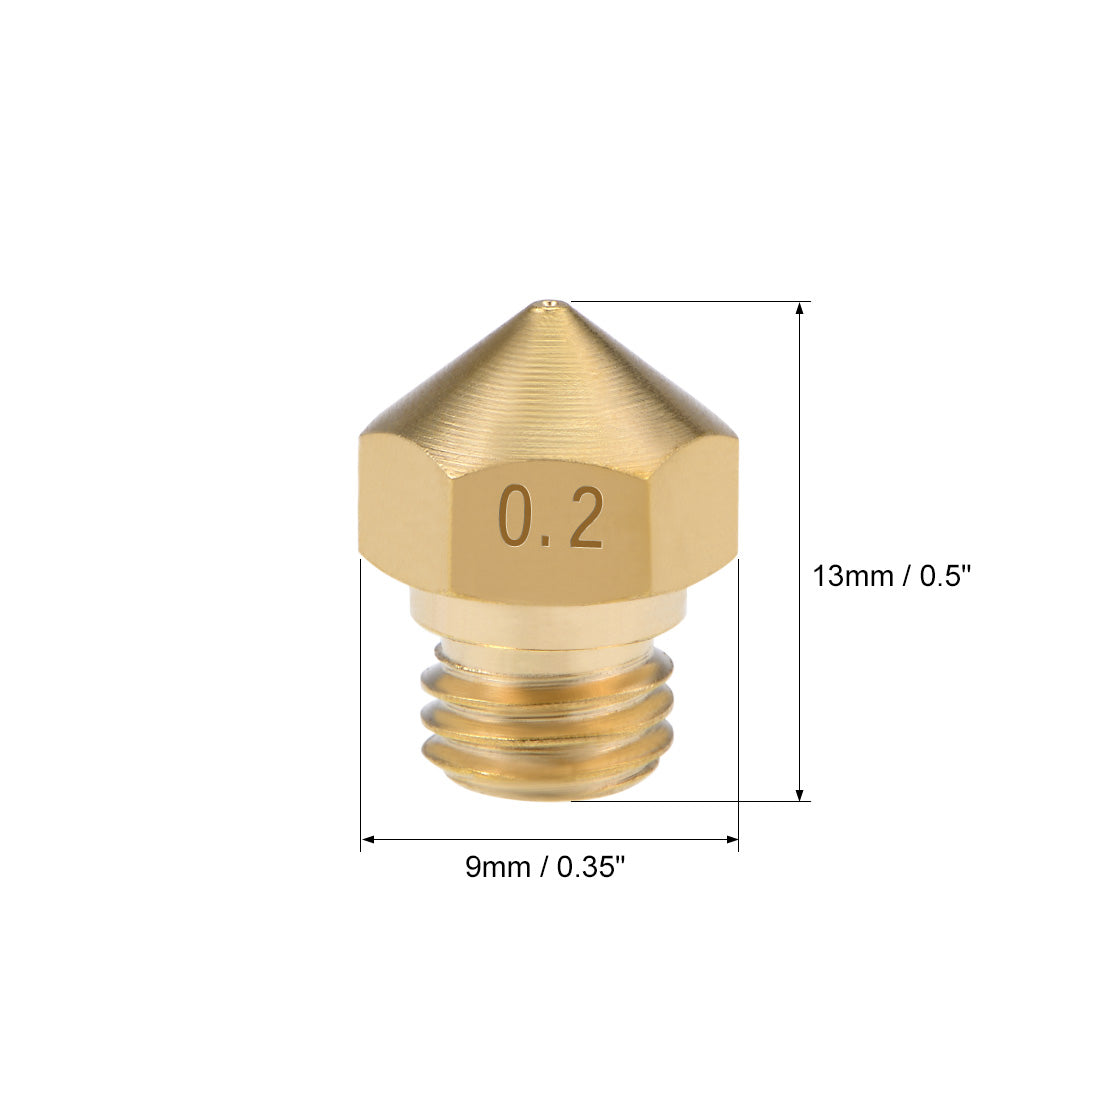 uxcell Uxcell 0.2mm 3D Printer Nozzle Head M7 Thread Replacement for MK10 1.75mm Extruder Print, Brass 10pcs